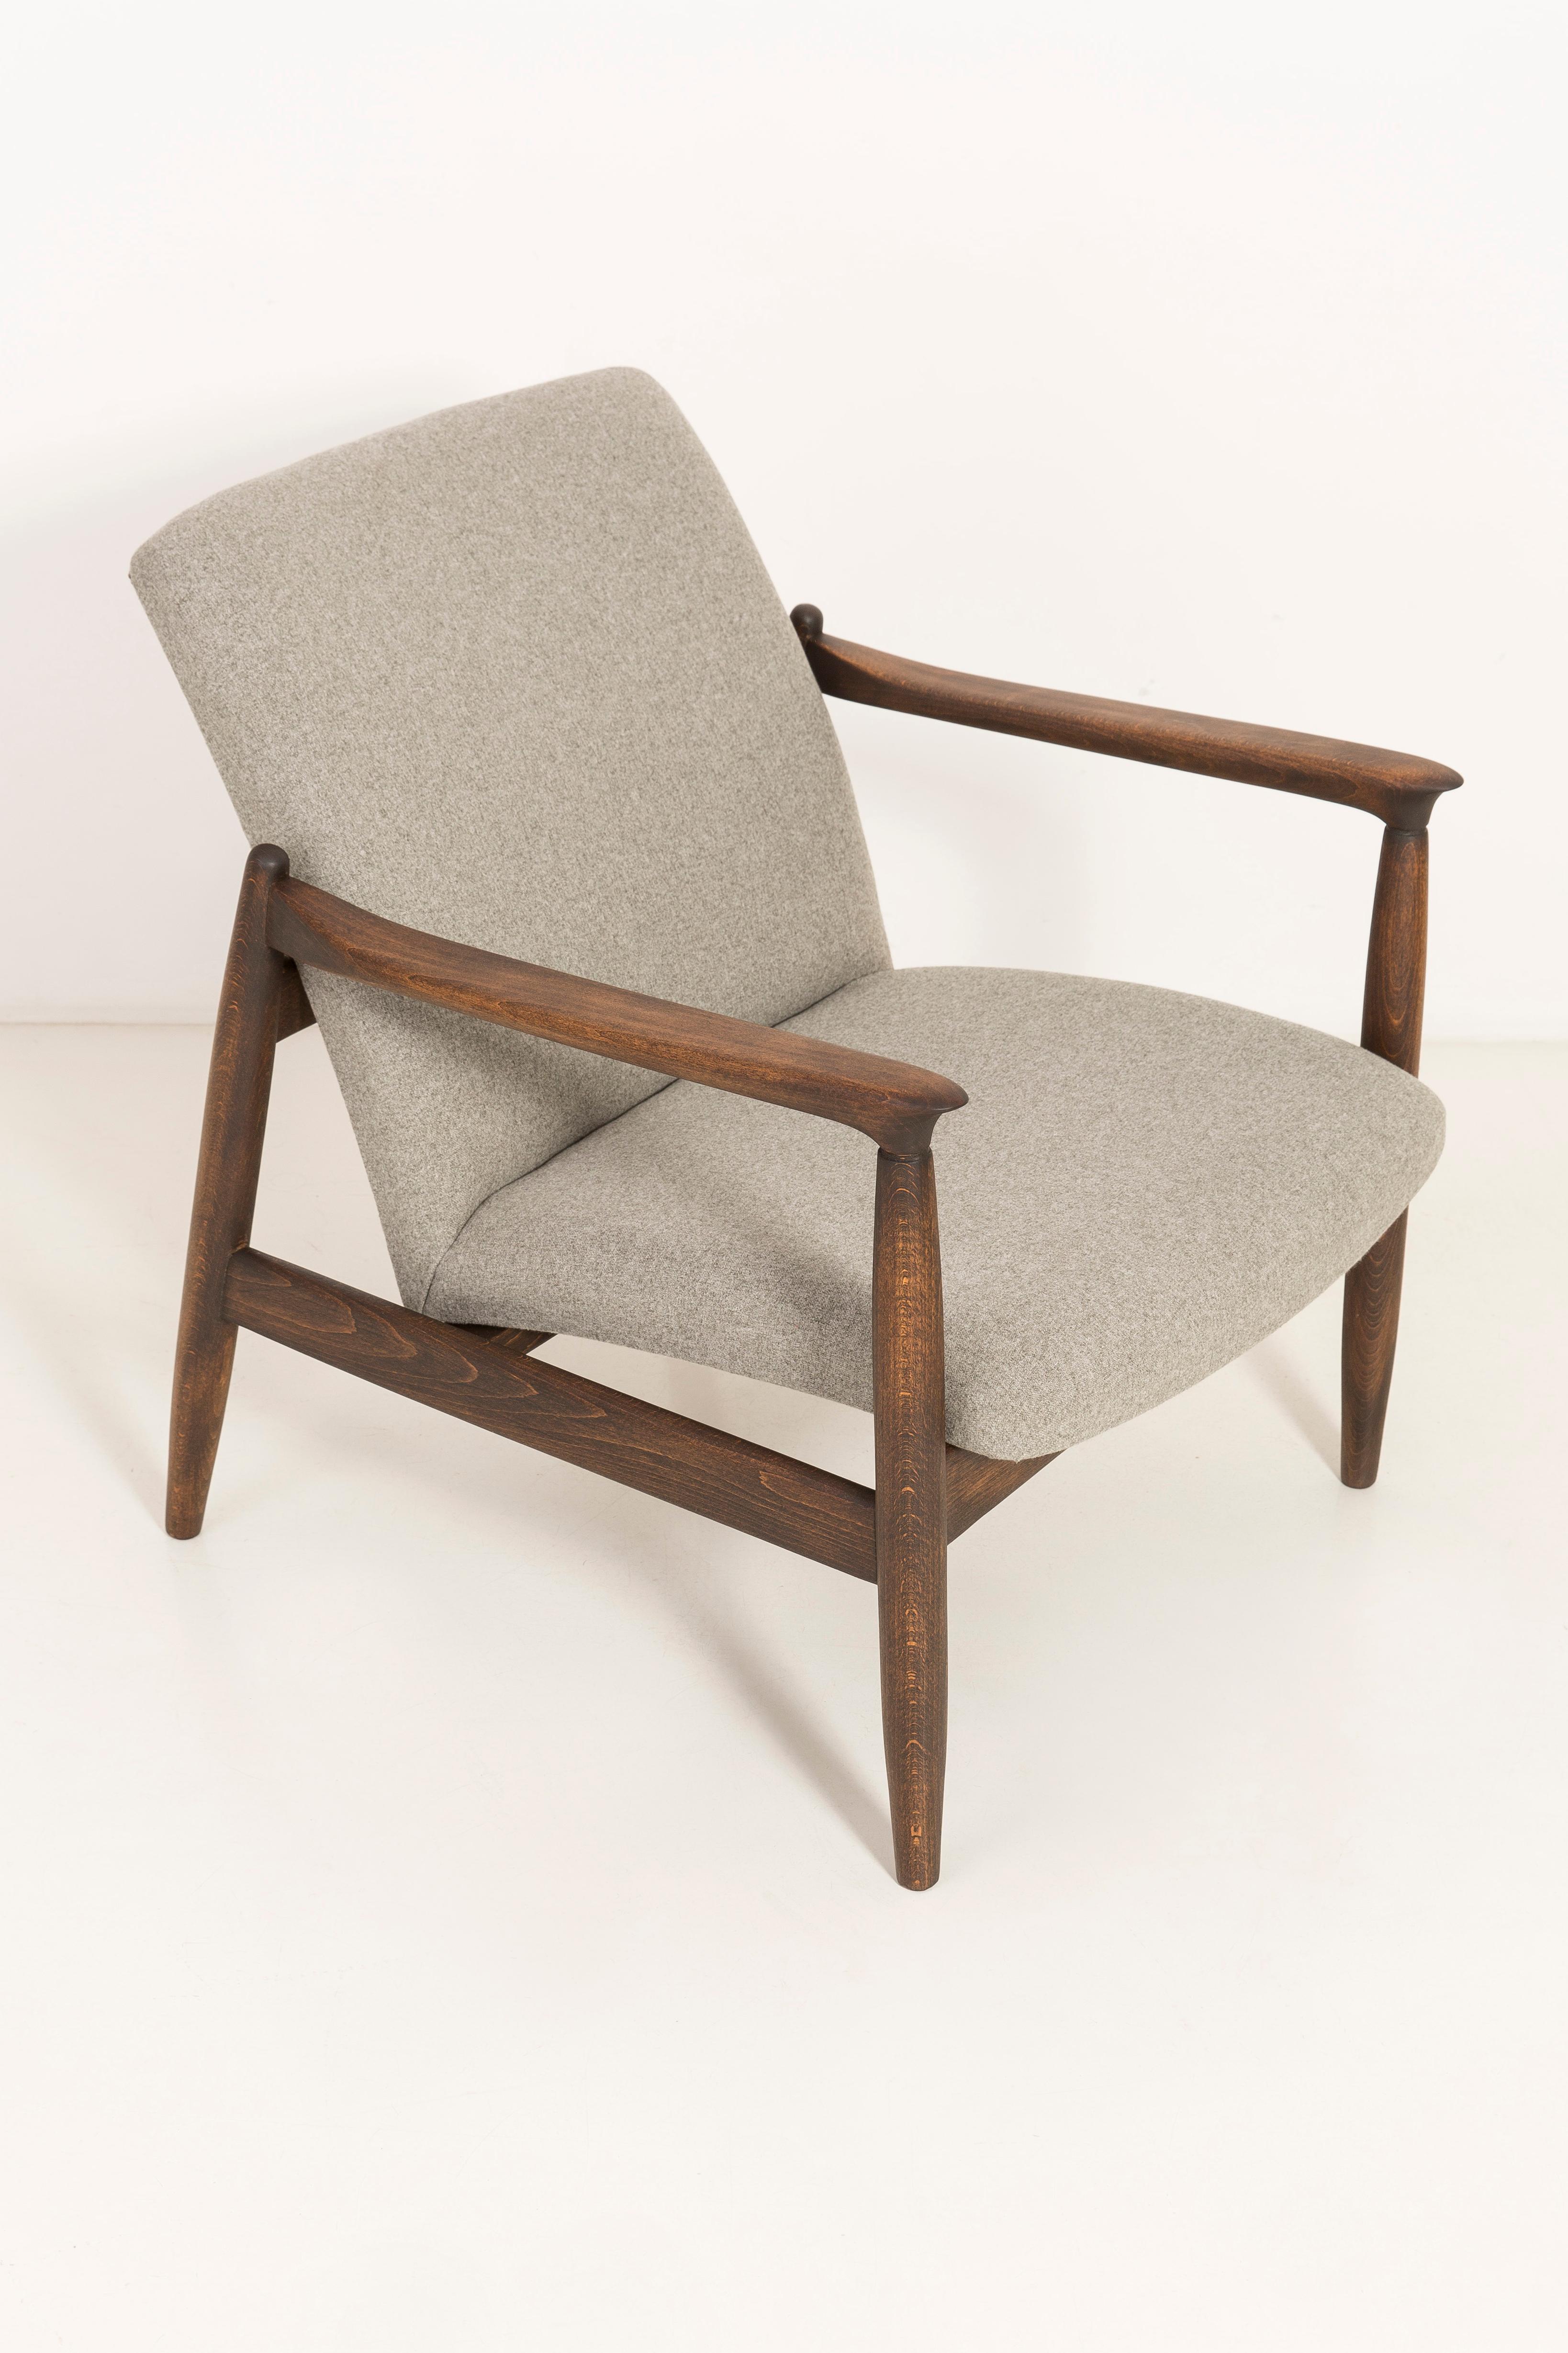 Beige armchair, designed by Edmund Homa. The armchair was made in the 1960s in the Goscieninska Furniture Factory. It is made from solid beechwood. The GFM type armchair is regarded one of the best Polish armchair design from the previous age. The